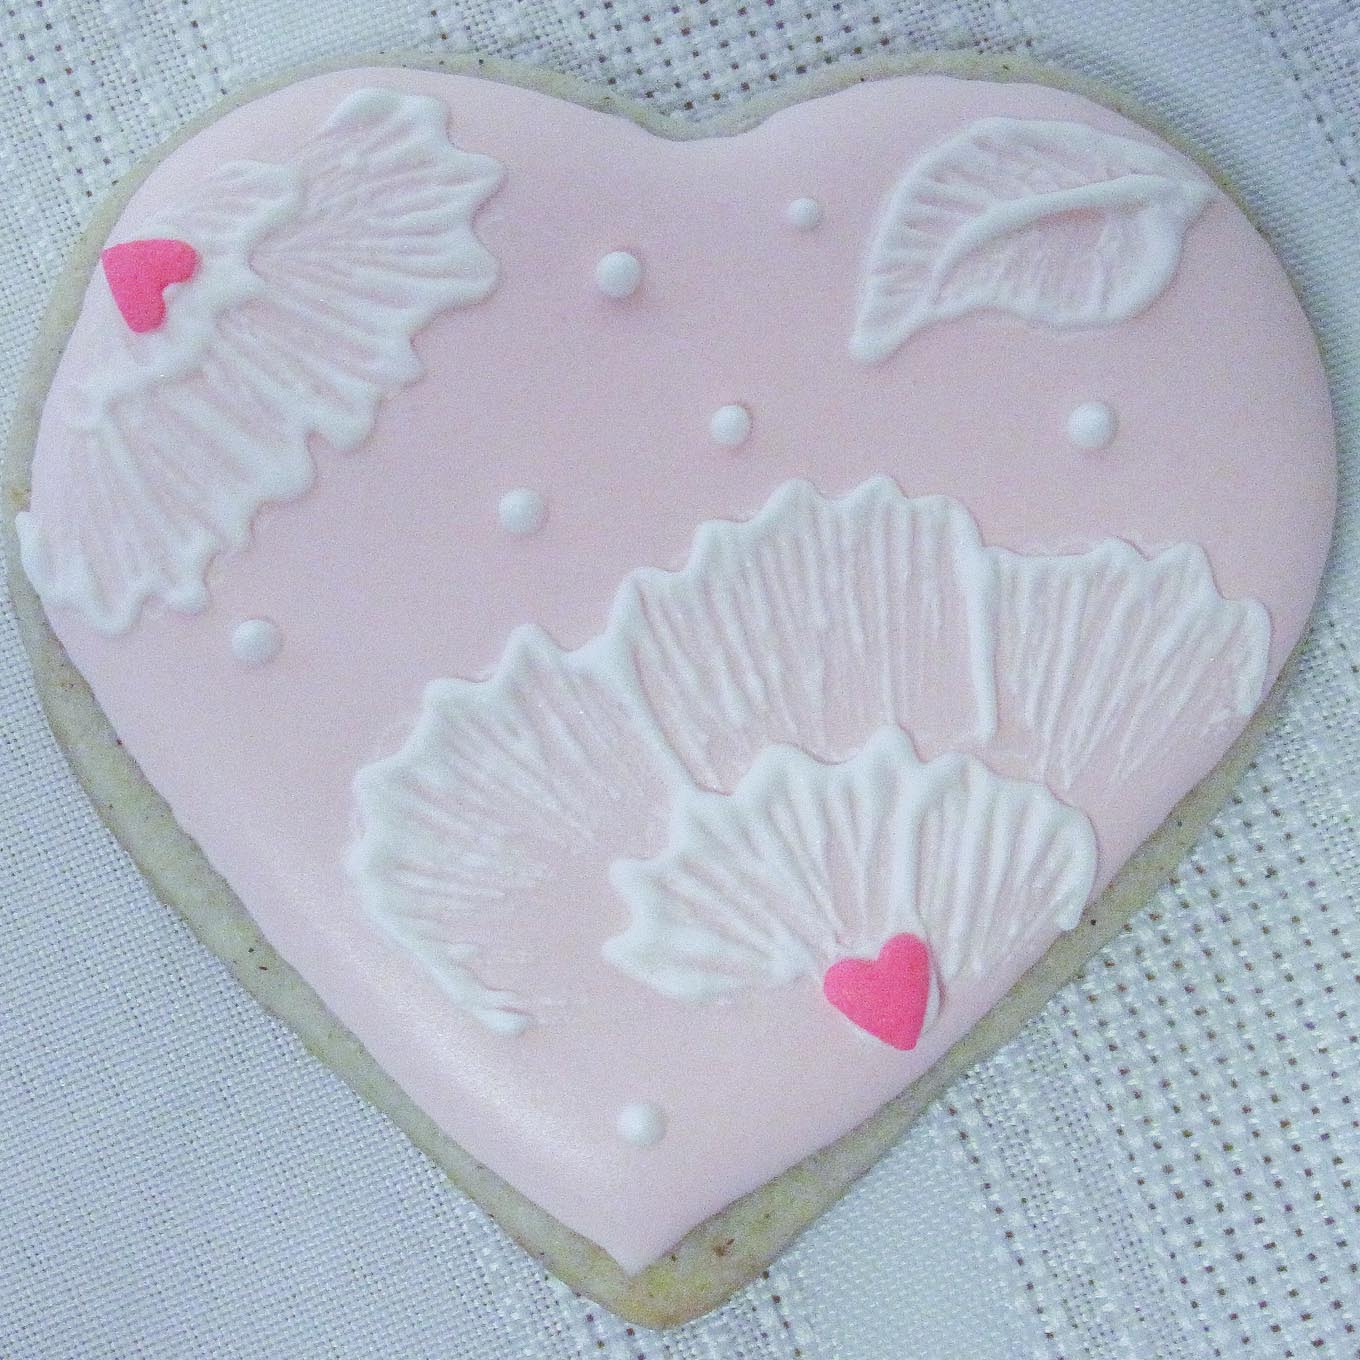 Heart shaped sugar cookie decorated with pink icing.